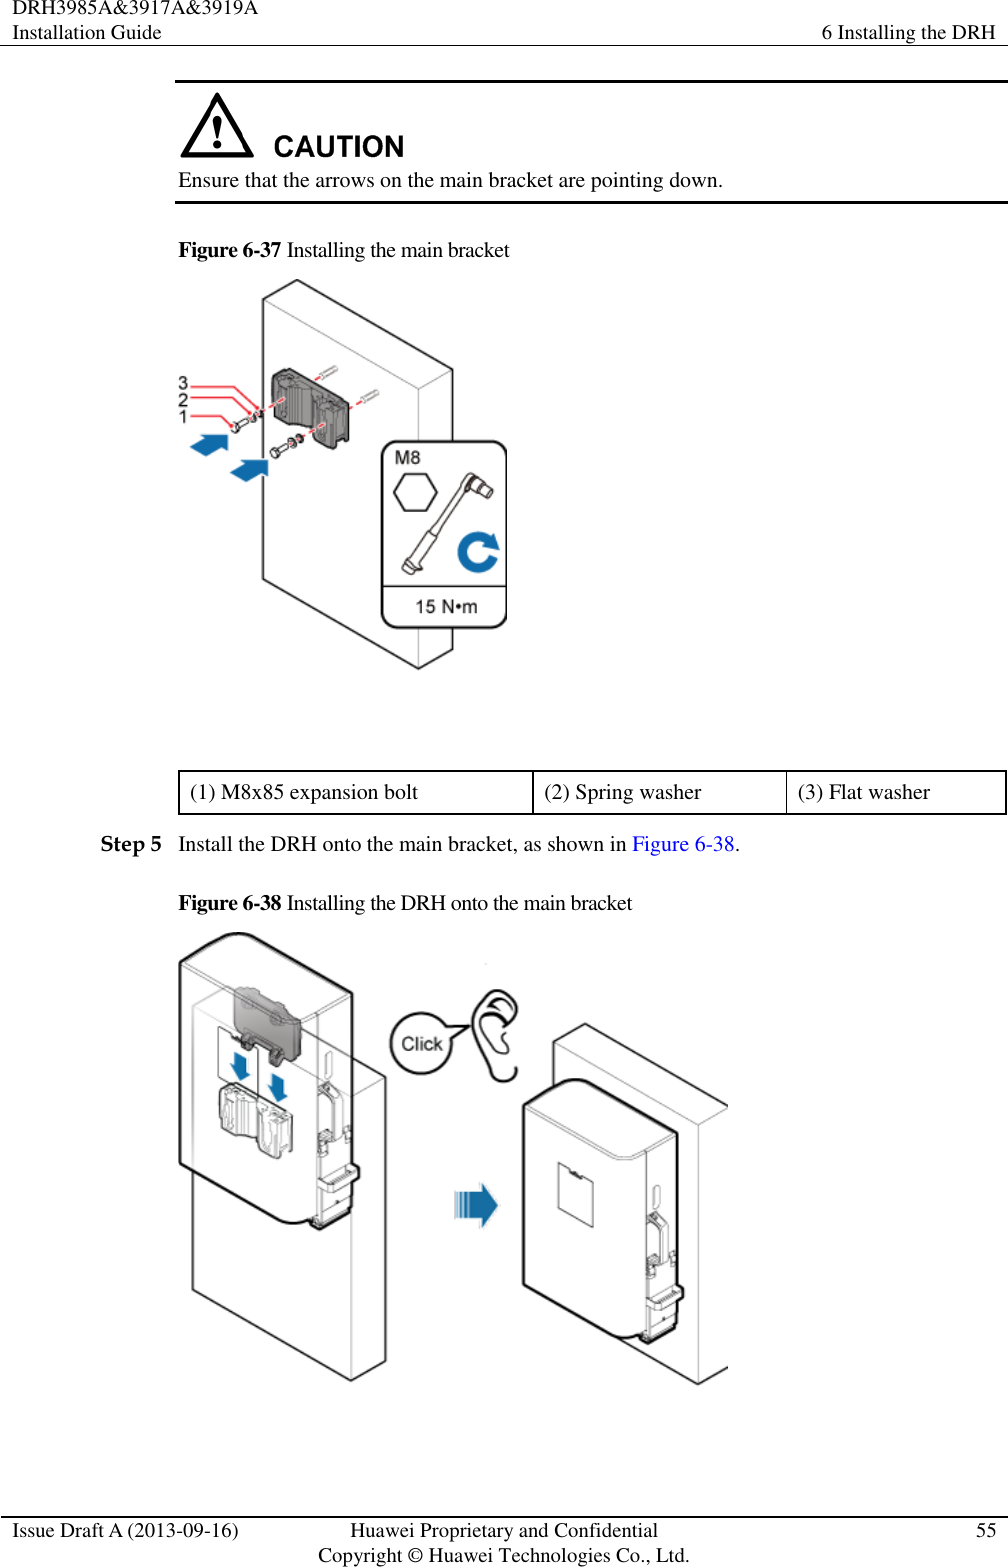 DRH3985A&amp;3917A&amp;3919A Installation Guide 6 Installing the DRH  Issue Draft A (2013-09-16) Huawei Proprietary and Confidential                                     Copyright © Huawei Technologies Co., Ltd. 55   Ensure that the arrows on the main bracket are pointing down. Figure 6-37 Installing the main bracket   (1) M8x85 expansion bolt (2) Spring washer (3) Flat washer Step 5 Install the DRH onto the main bracket, as shown in Figure 6-38. Figure 6-38 Installing the DRH onto the main bracket   